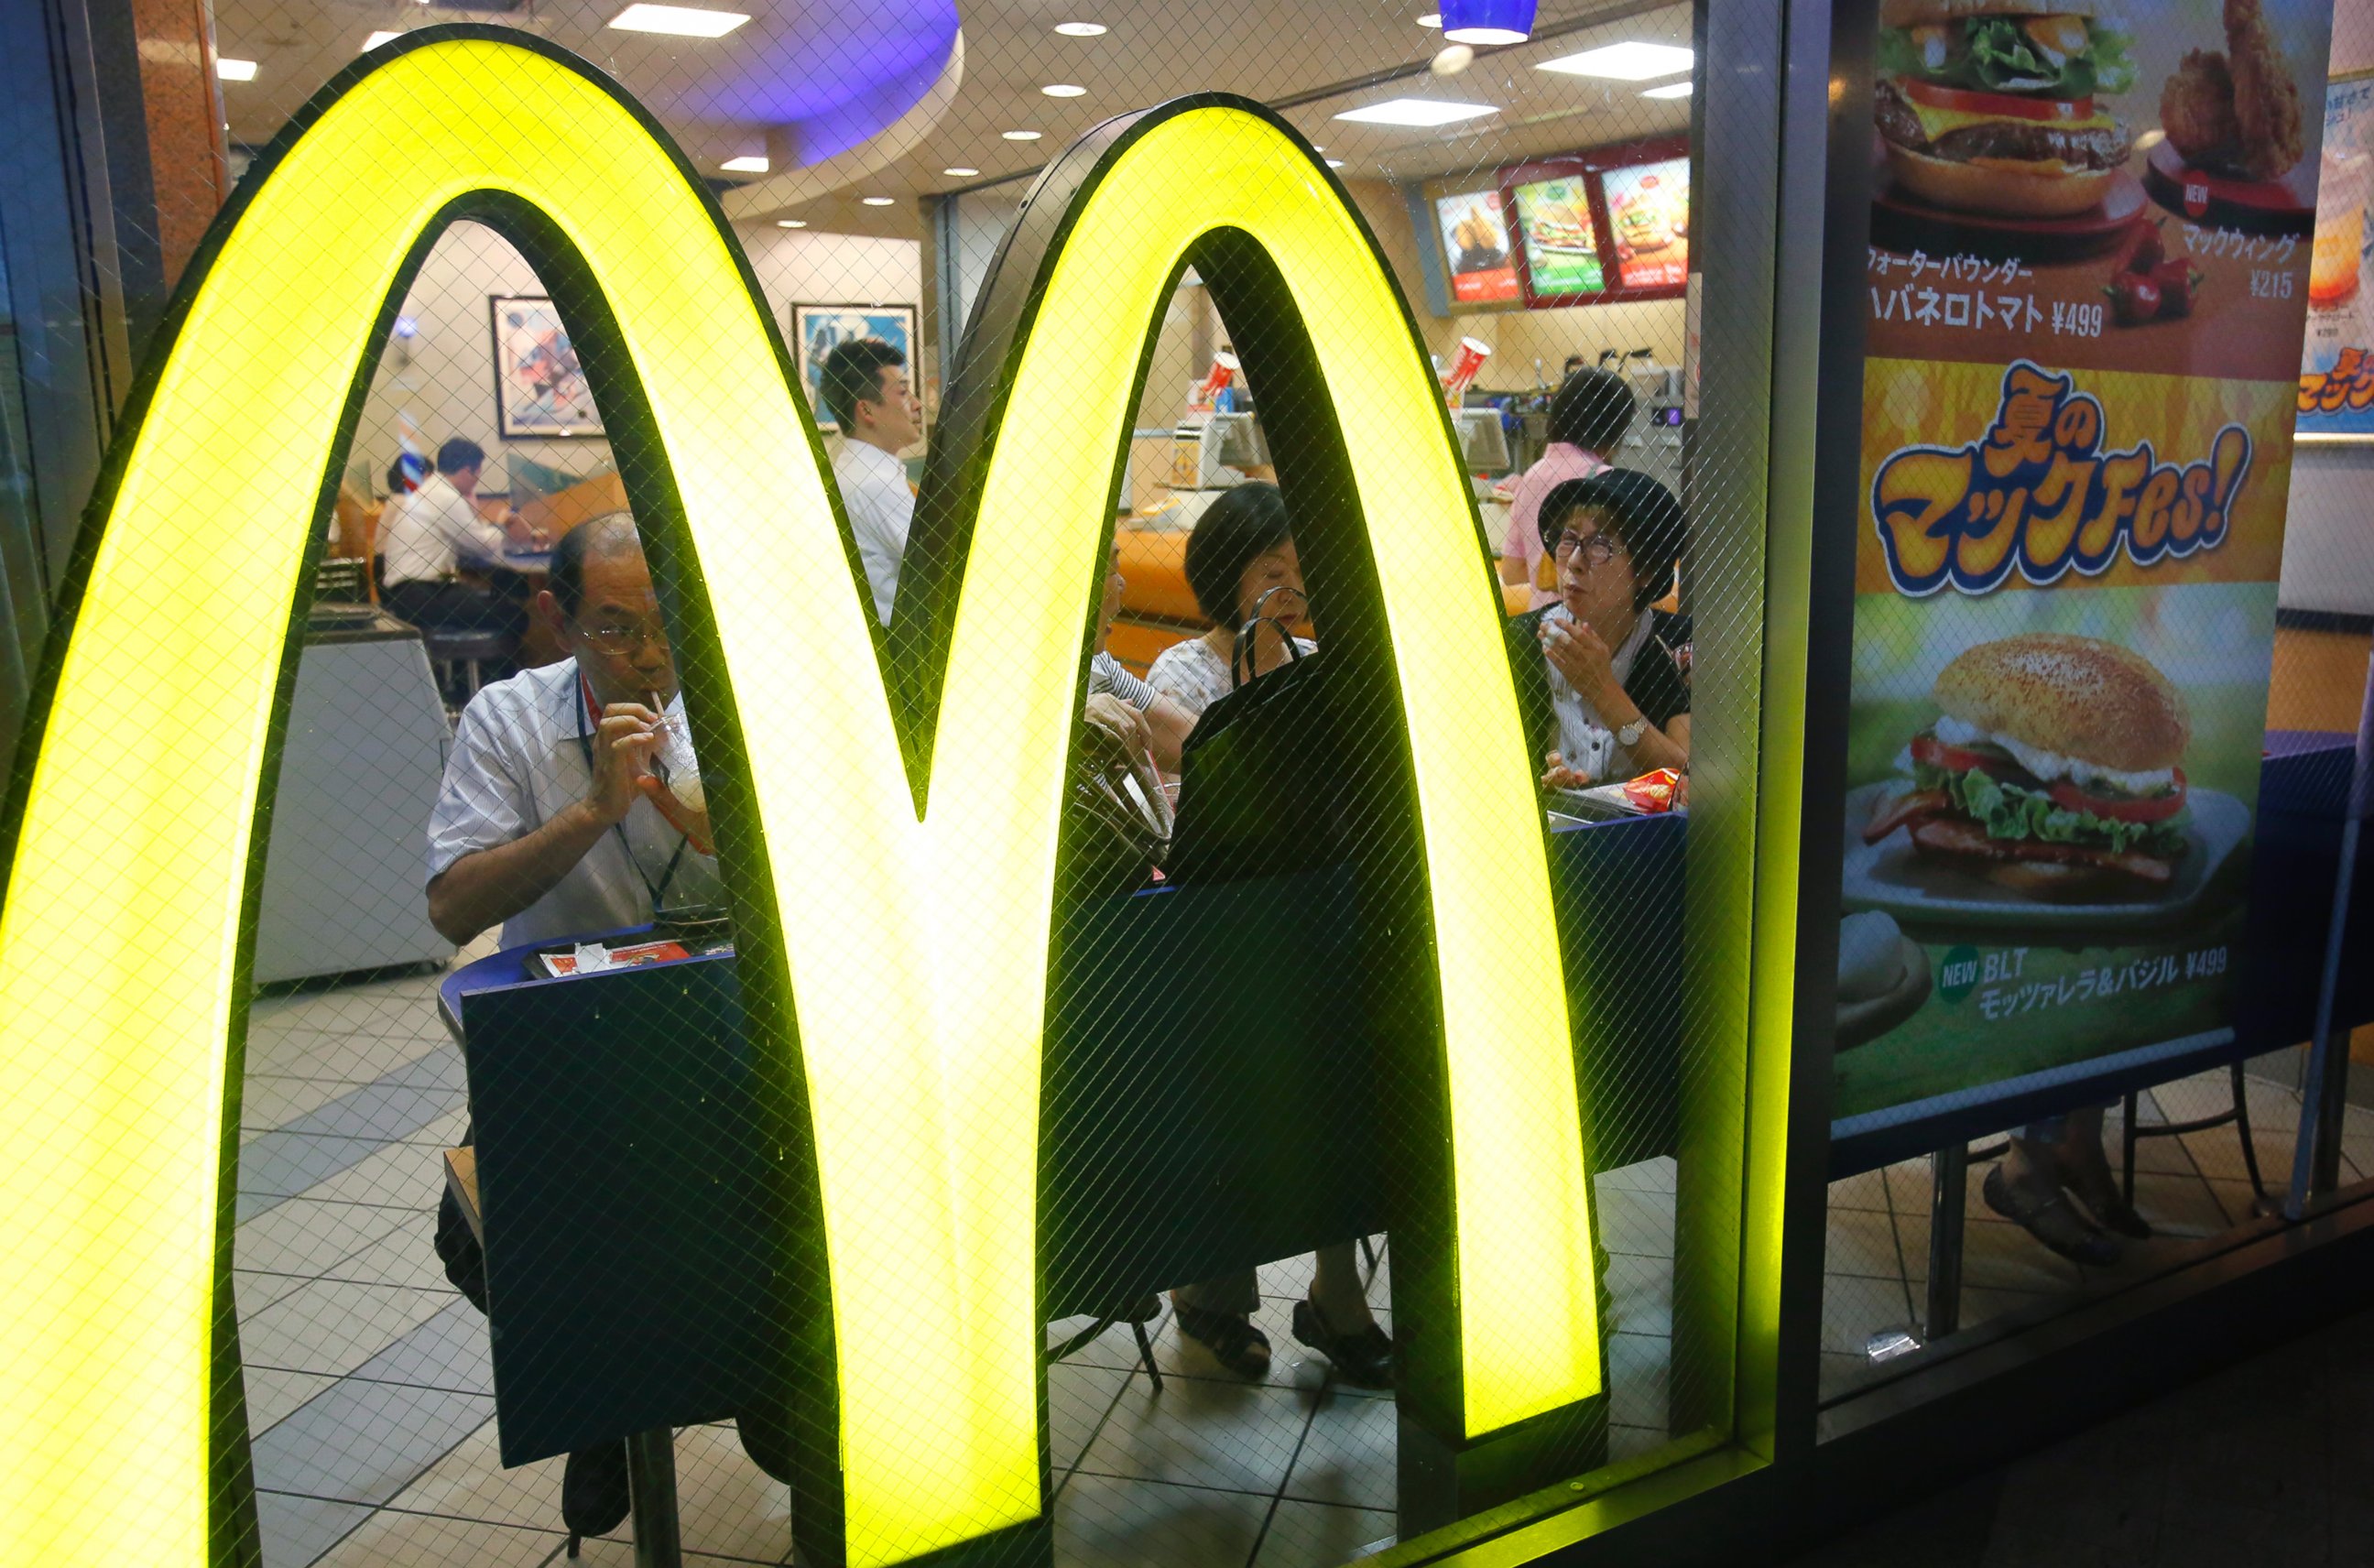 PHOTO: Customers have a meal at a McDonald's restaurant in Tokyo, July 22, 2014.